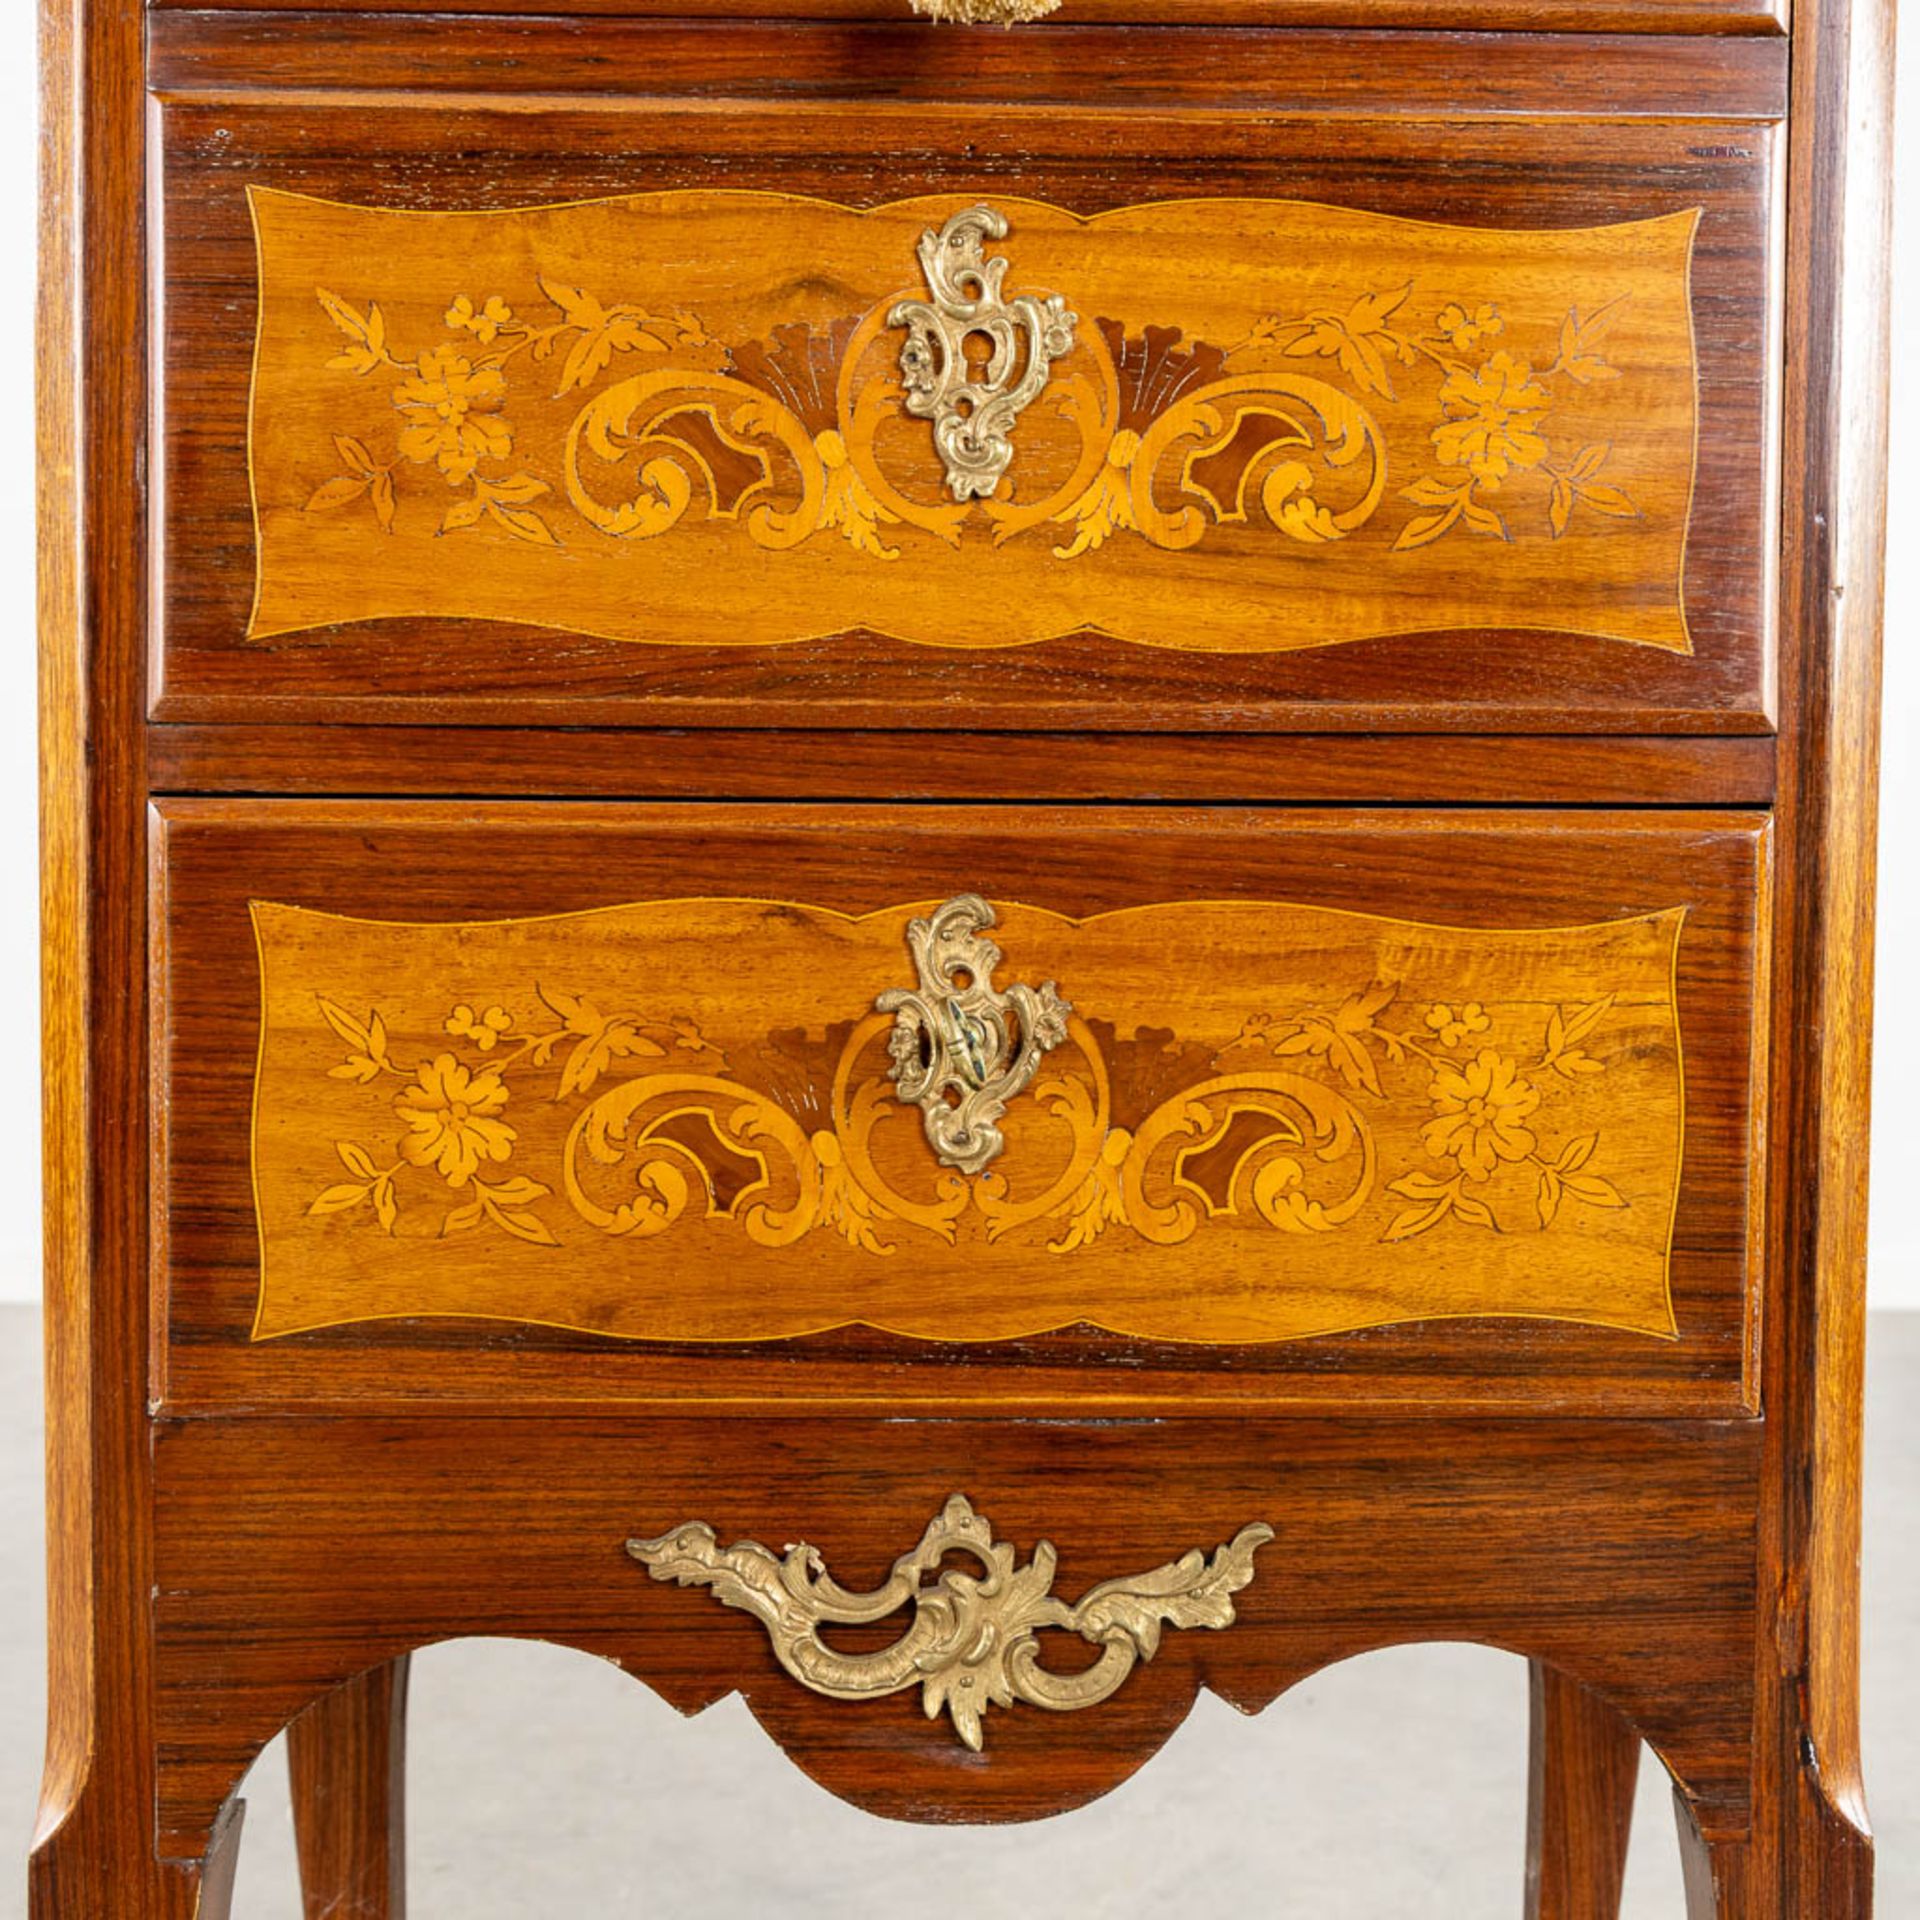 A Secretaire cabinet, Marquetry inlay and mounted with bronze. Circa 1900. (L:34 x W:56 x H:128 cm) - Image 13 of 15